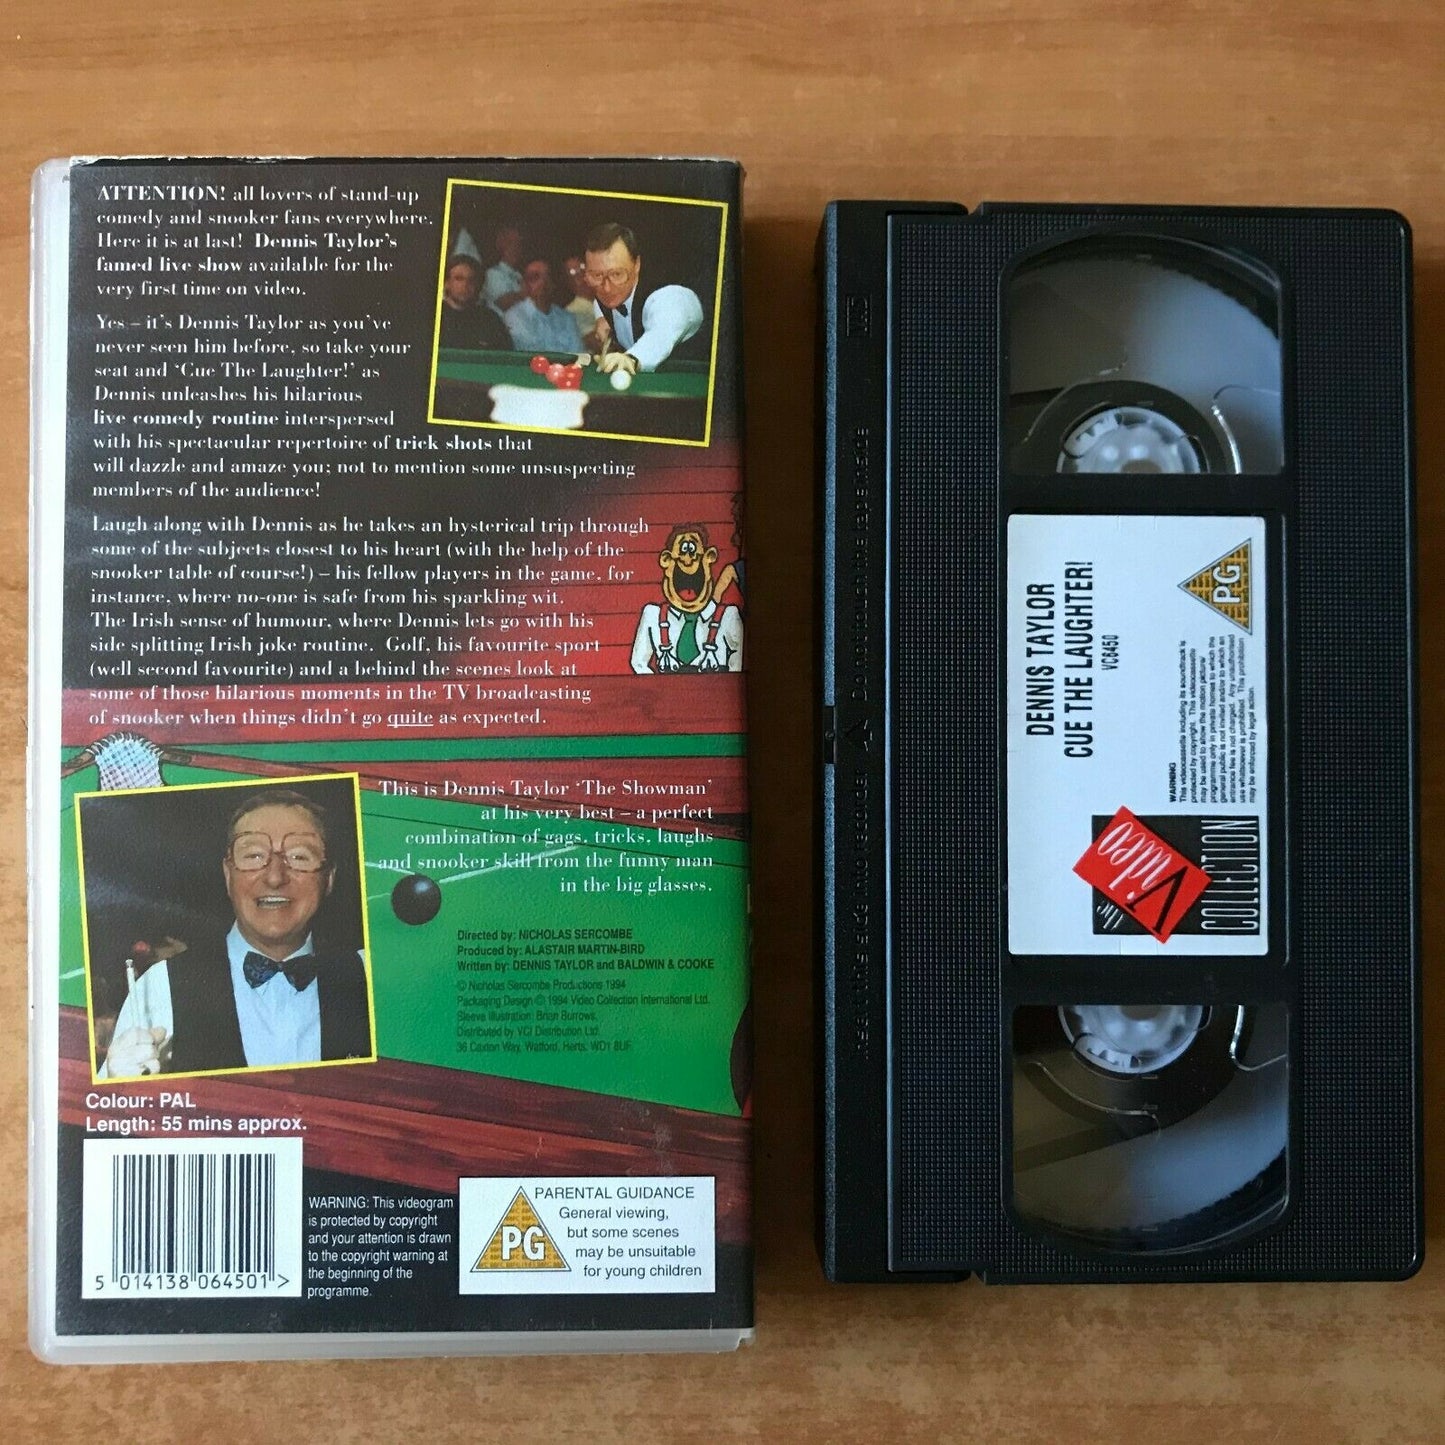 Dennis Taylor: Cue The Laughter - Snooker - Comedy Show [Time: 55mins] Pal VHS-